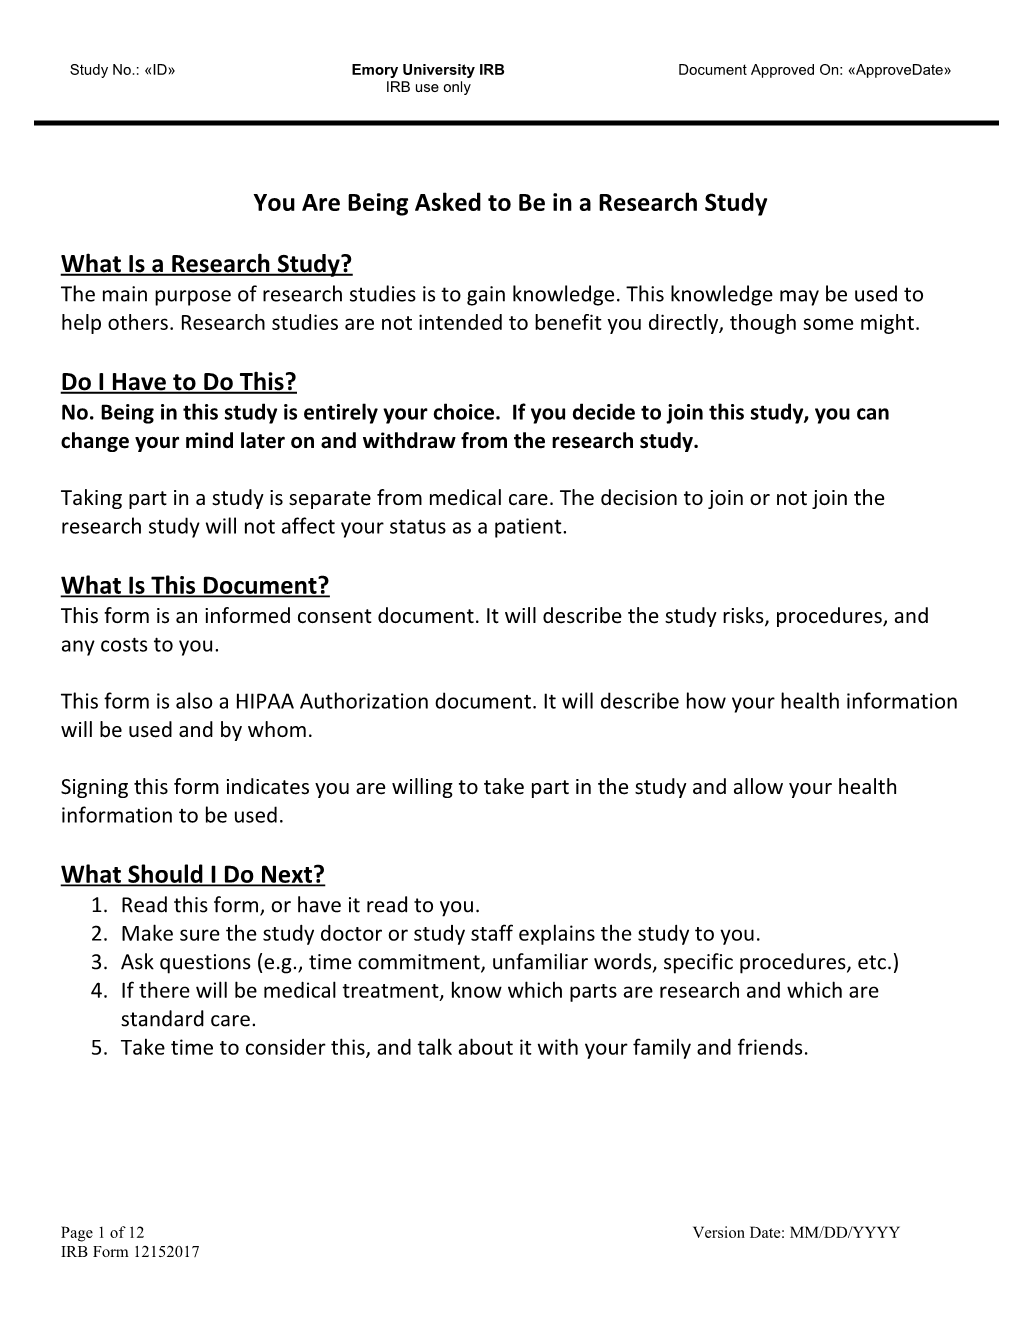 You Are Being Asked to Be in a Research Study